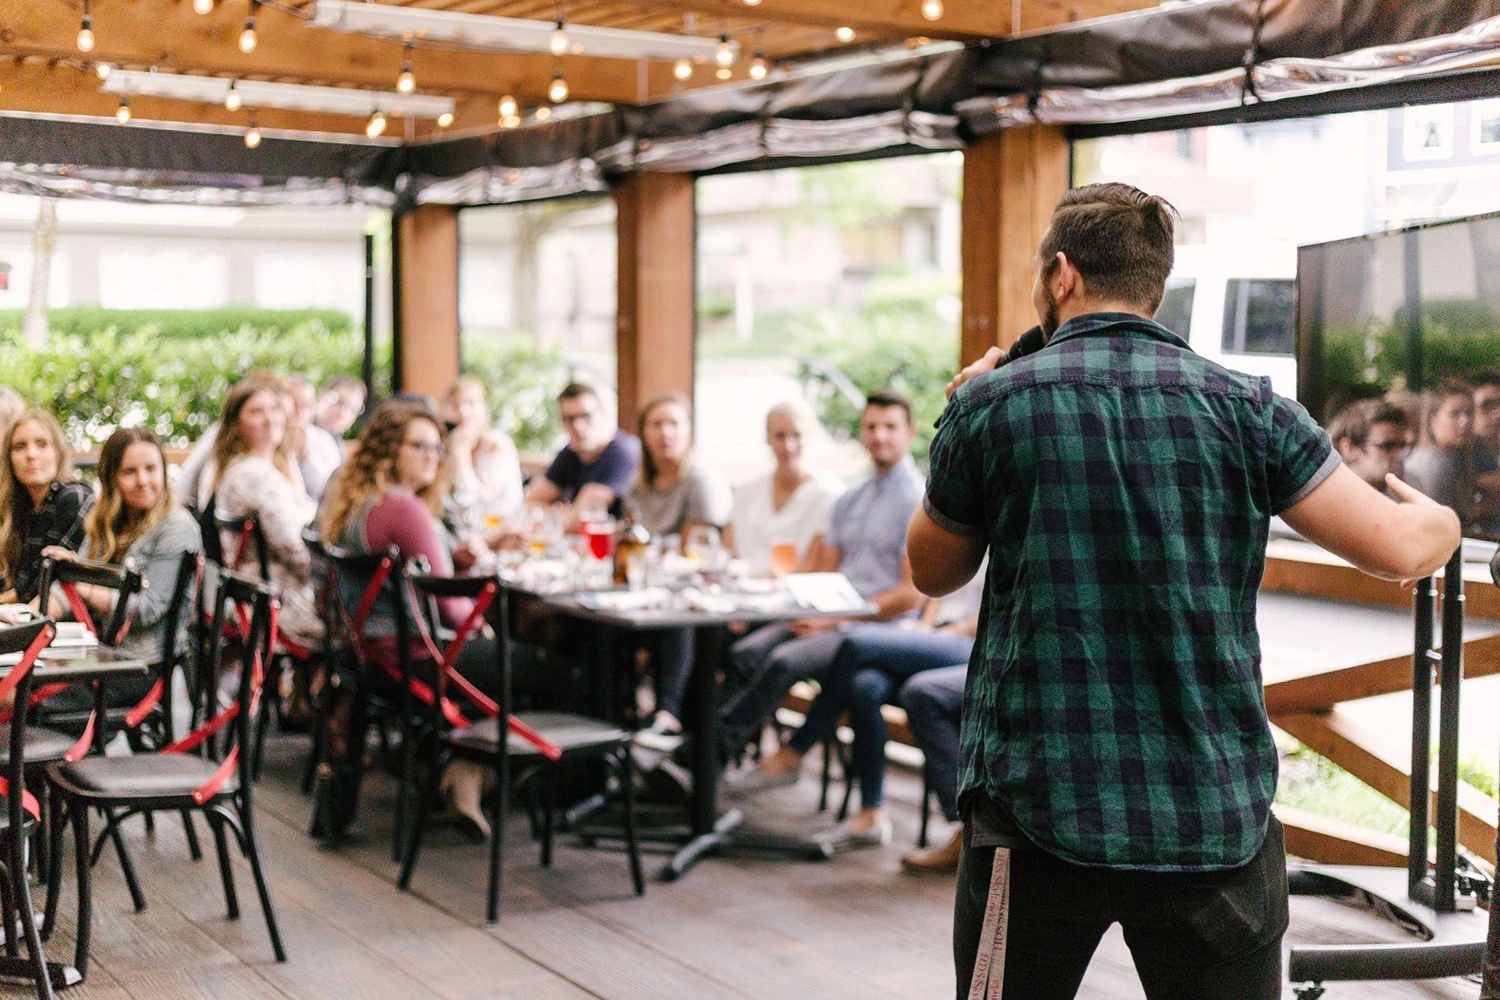 A man speaking to a group of outdoor diners, possibly representing a restaurant owner speaking with influencers and loyal diners about his new seasonal menu.